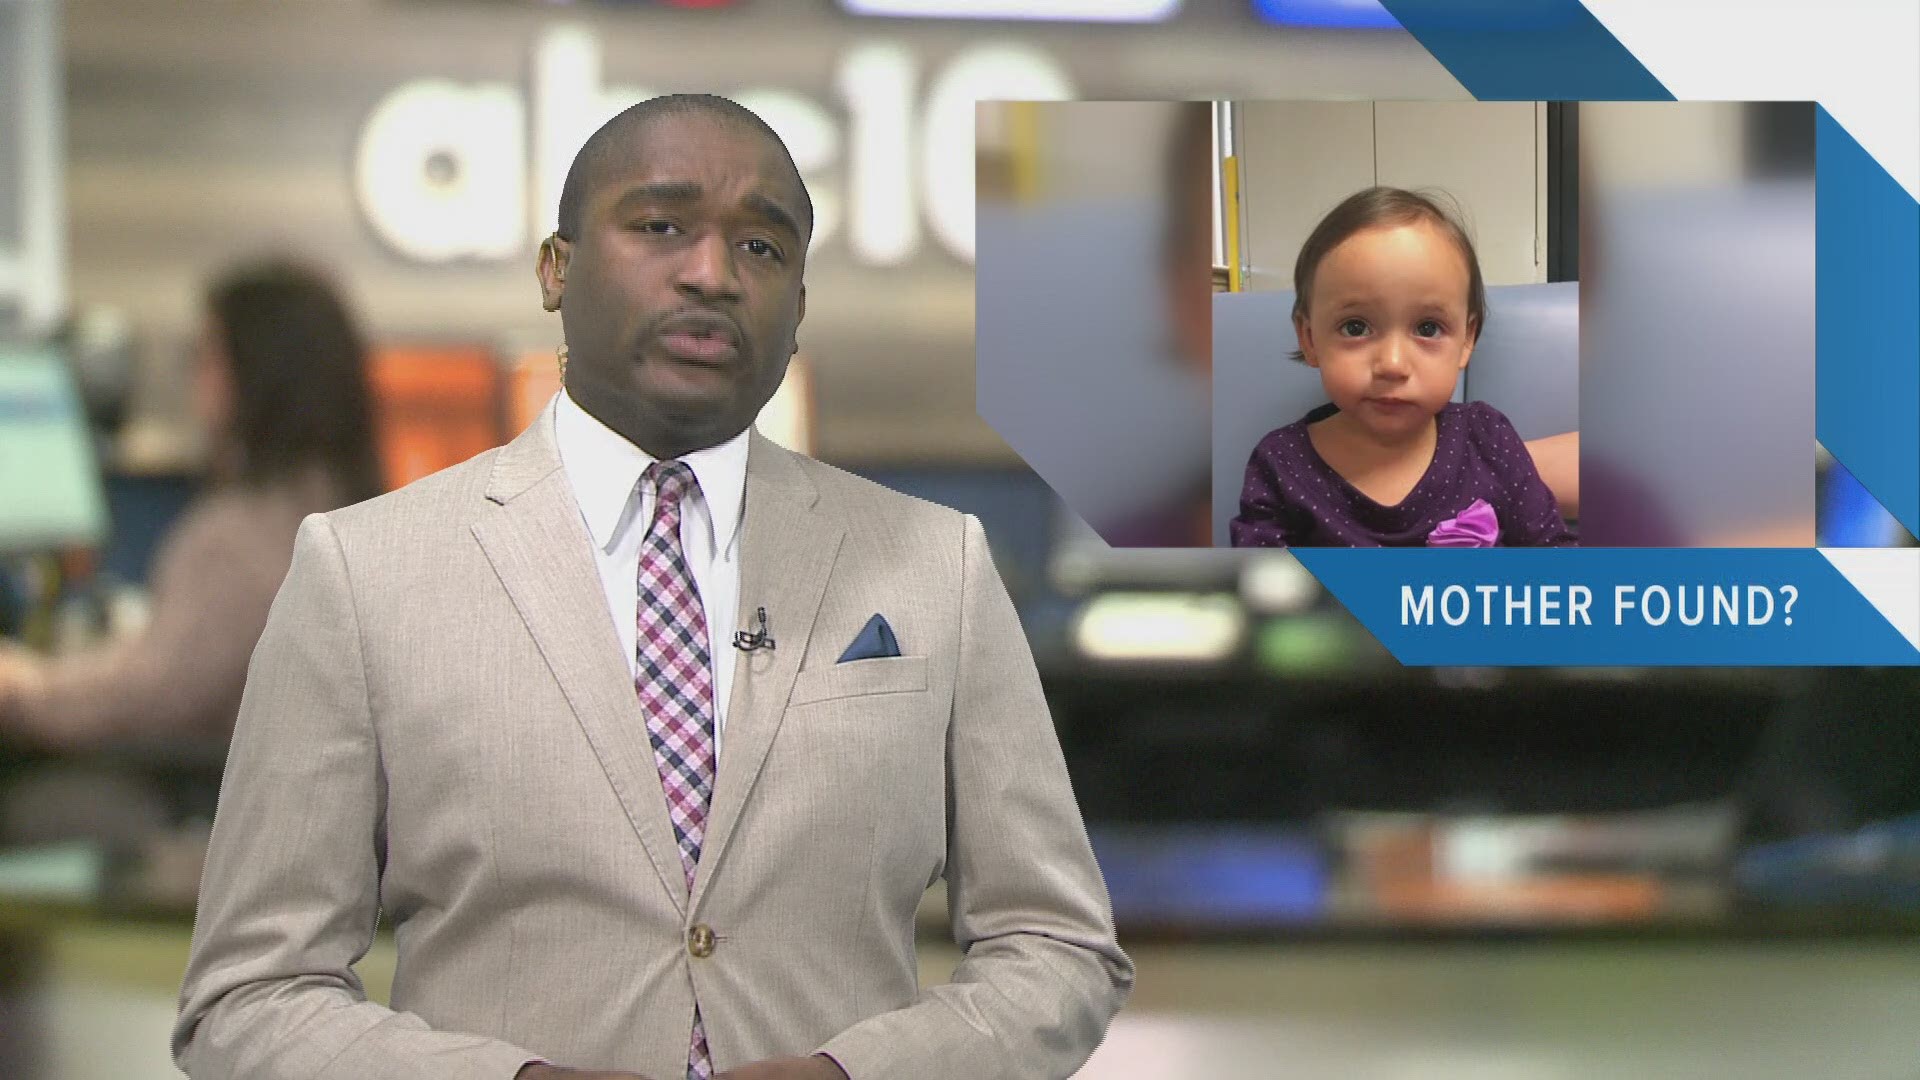 Evening Headlines: July 2, 2019 | Catch in-depth reporting on #LateNewsTonight at 11 p.m. | The latest Sacramento news is always at www.abc10.com